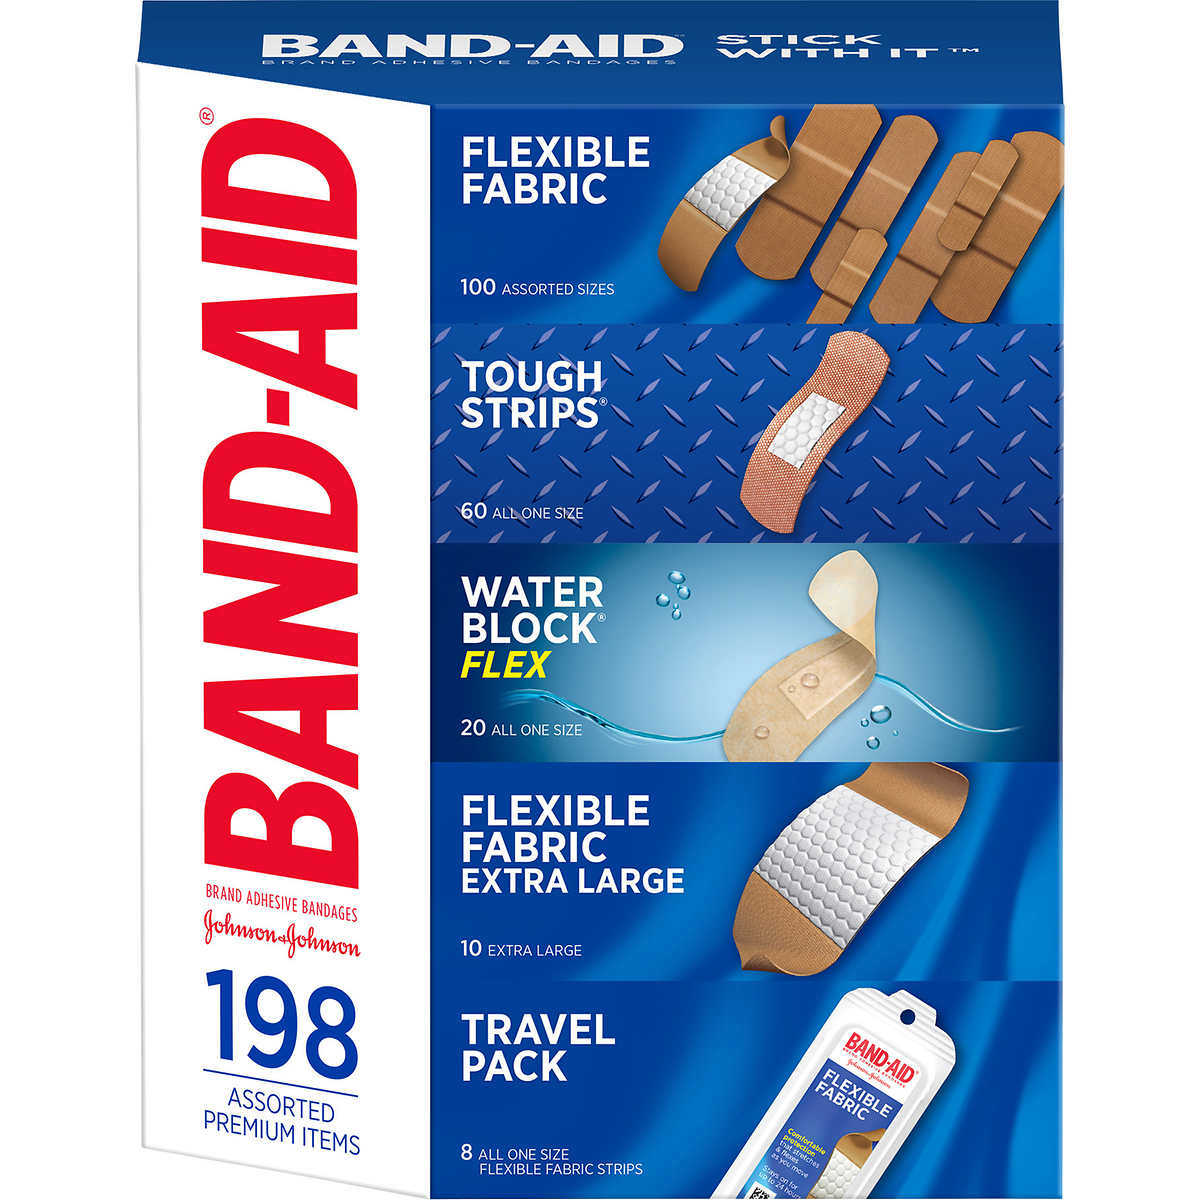 Band-aid Flex Fabric Travel Pack - 8 Each/pack (12 Pack)